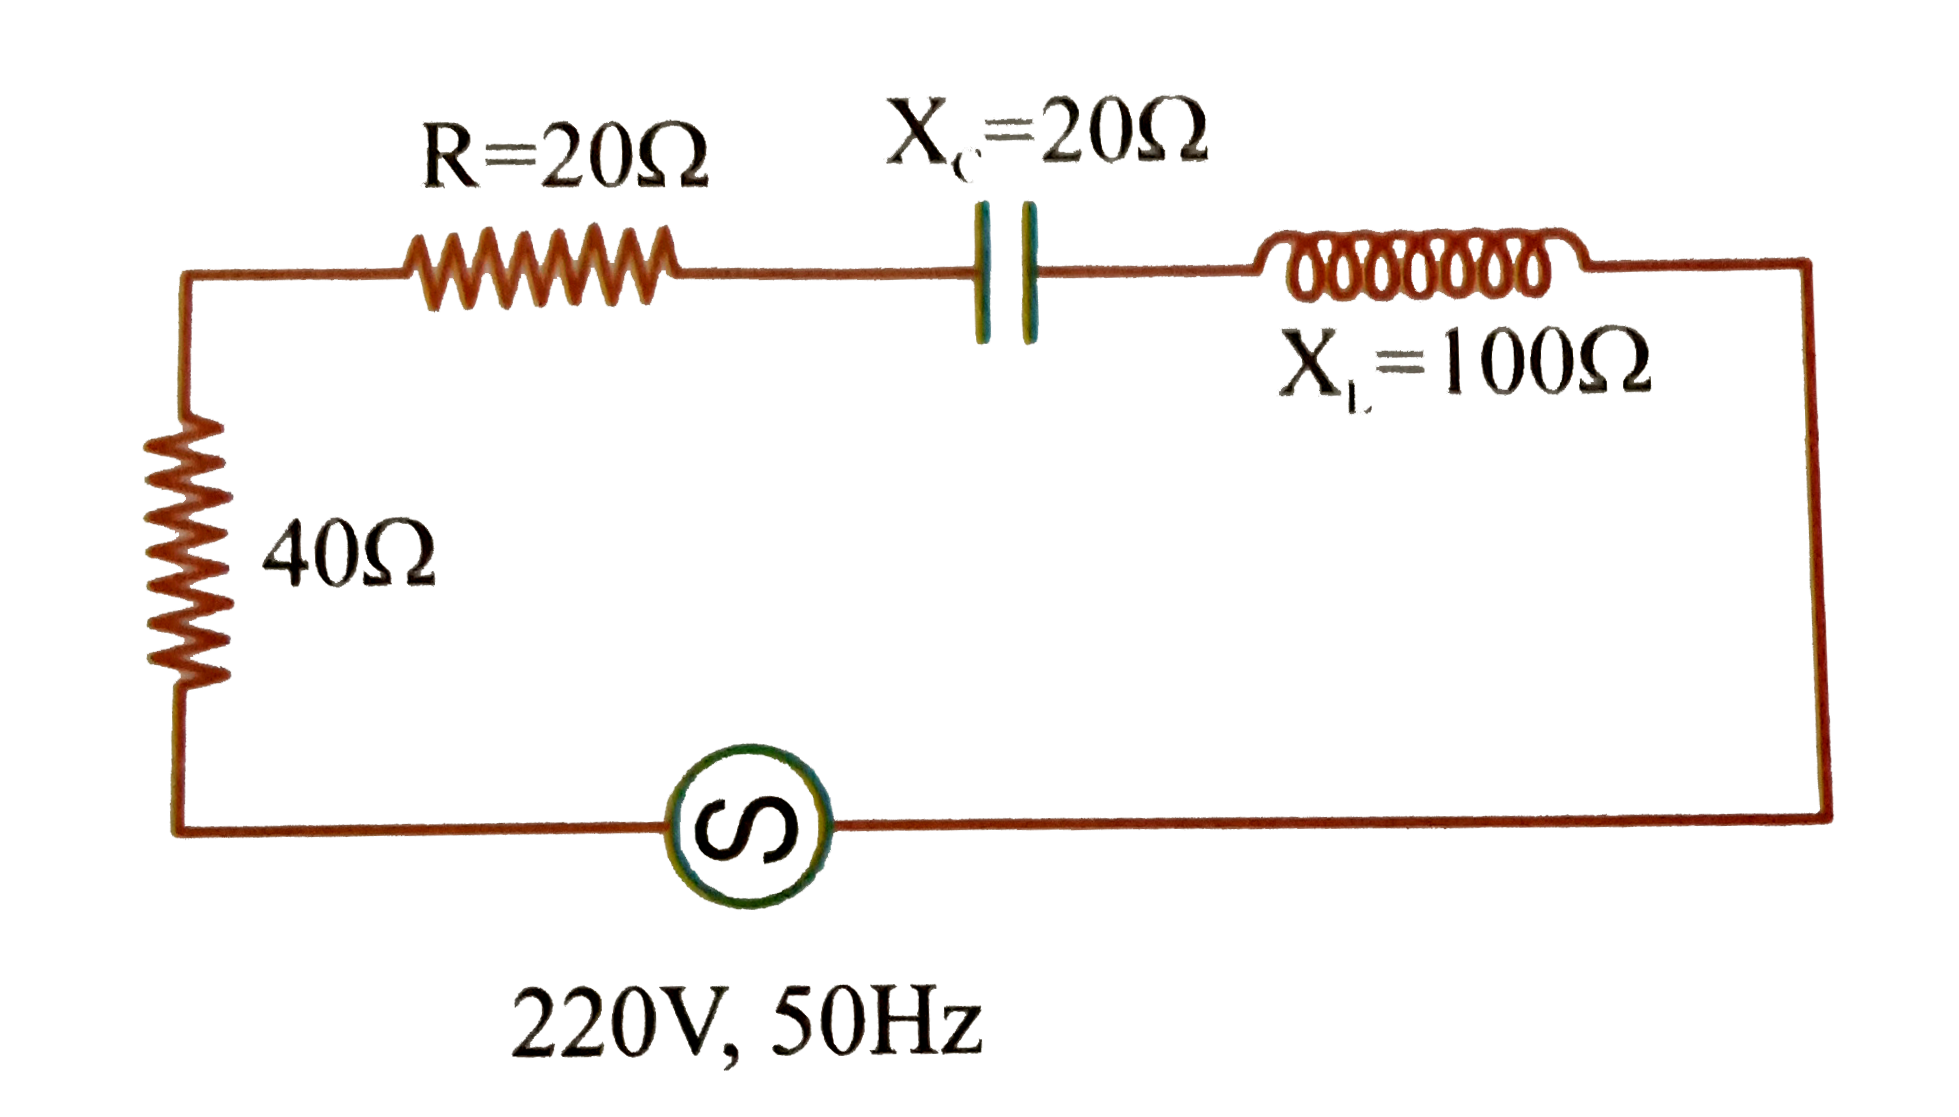 The power factor of the circuit shown in the figure is